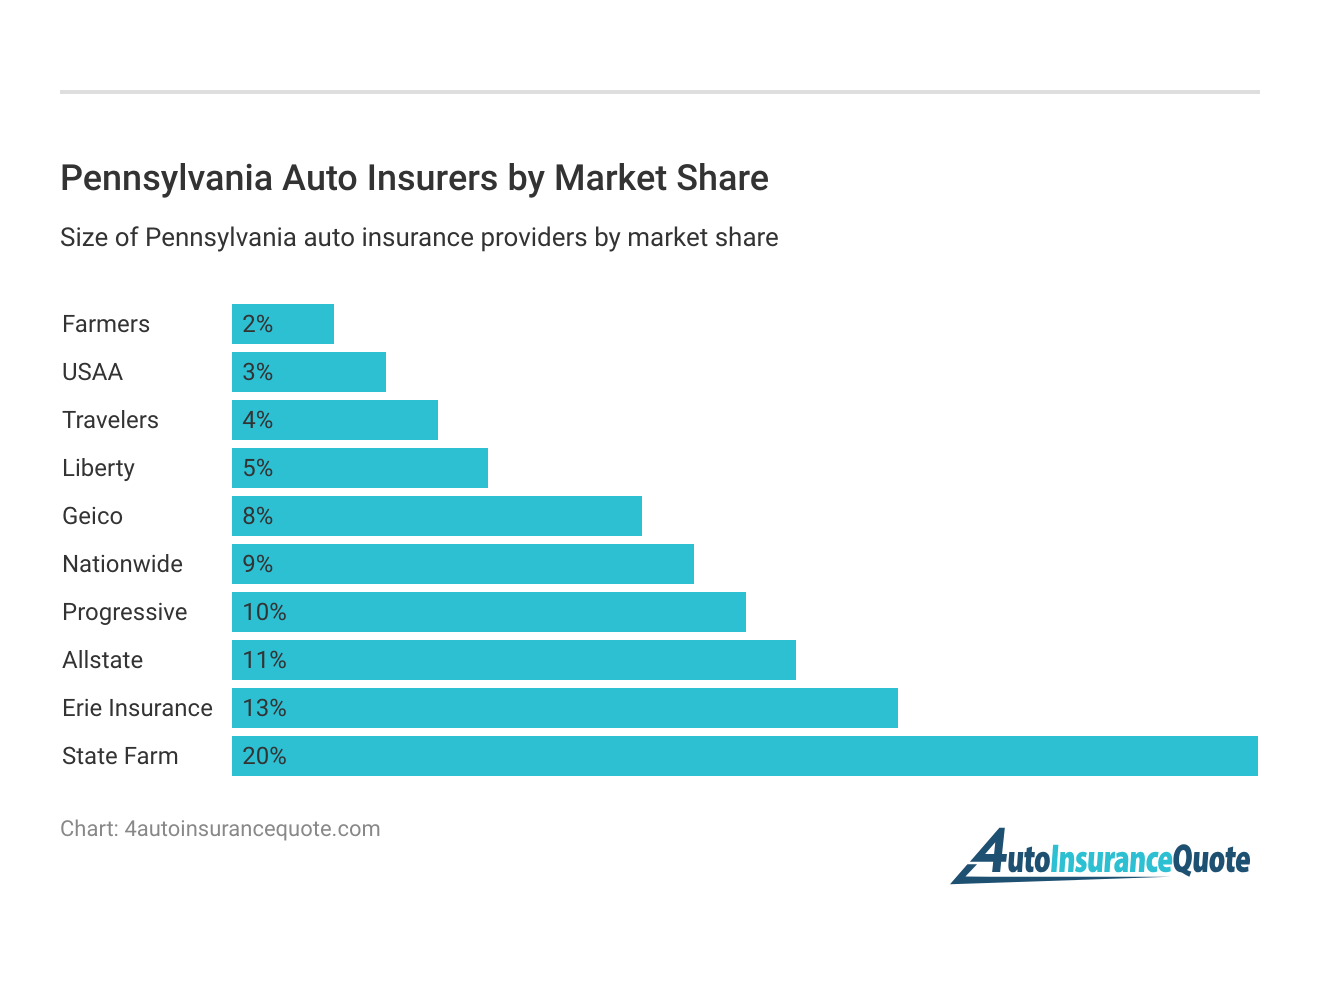 <h3>Pennsylvania Auto Insurers by Market Share</h3>